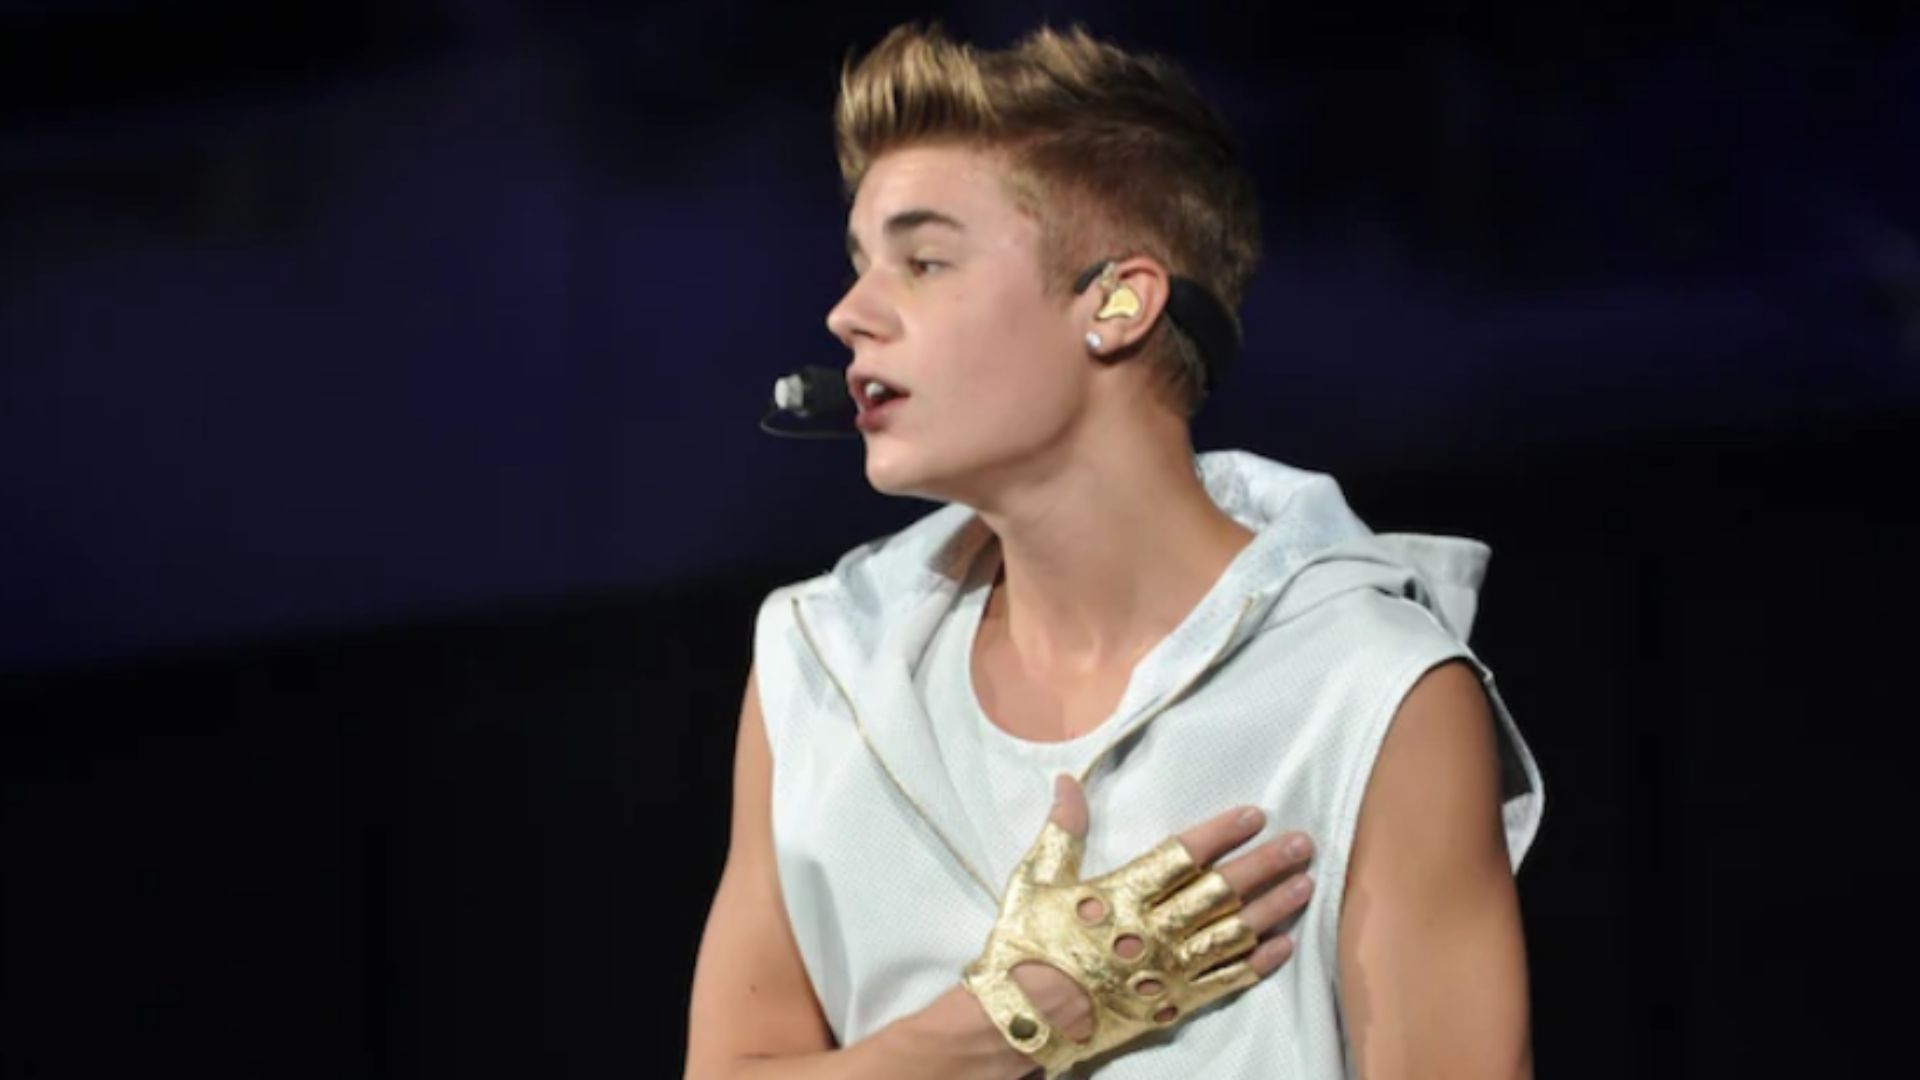 H&M affirms it has rights to Justin Bieber merchandise